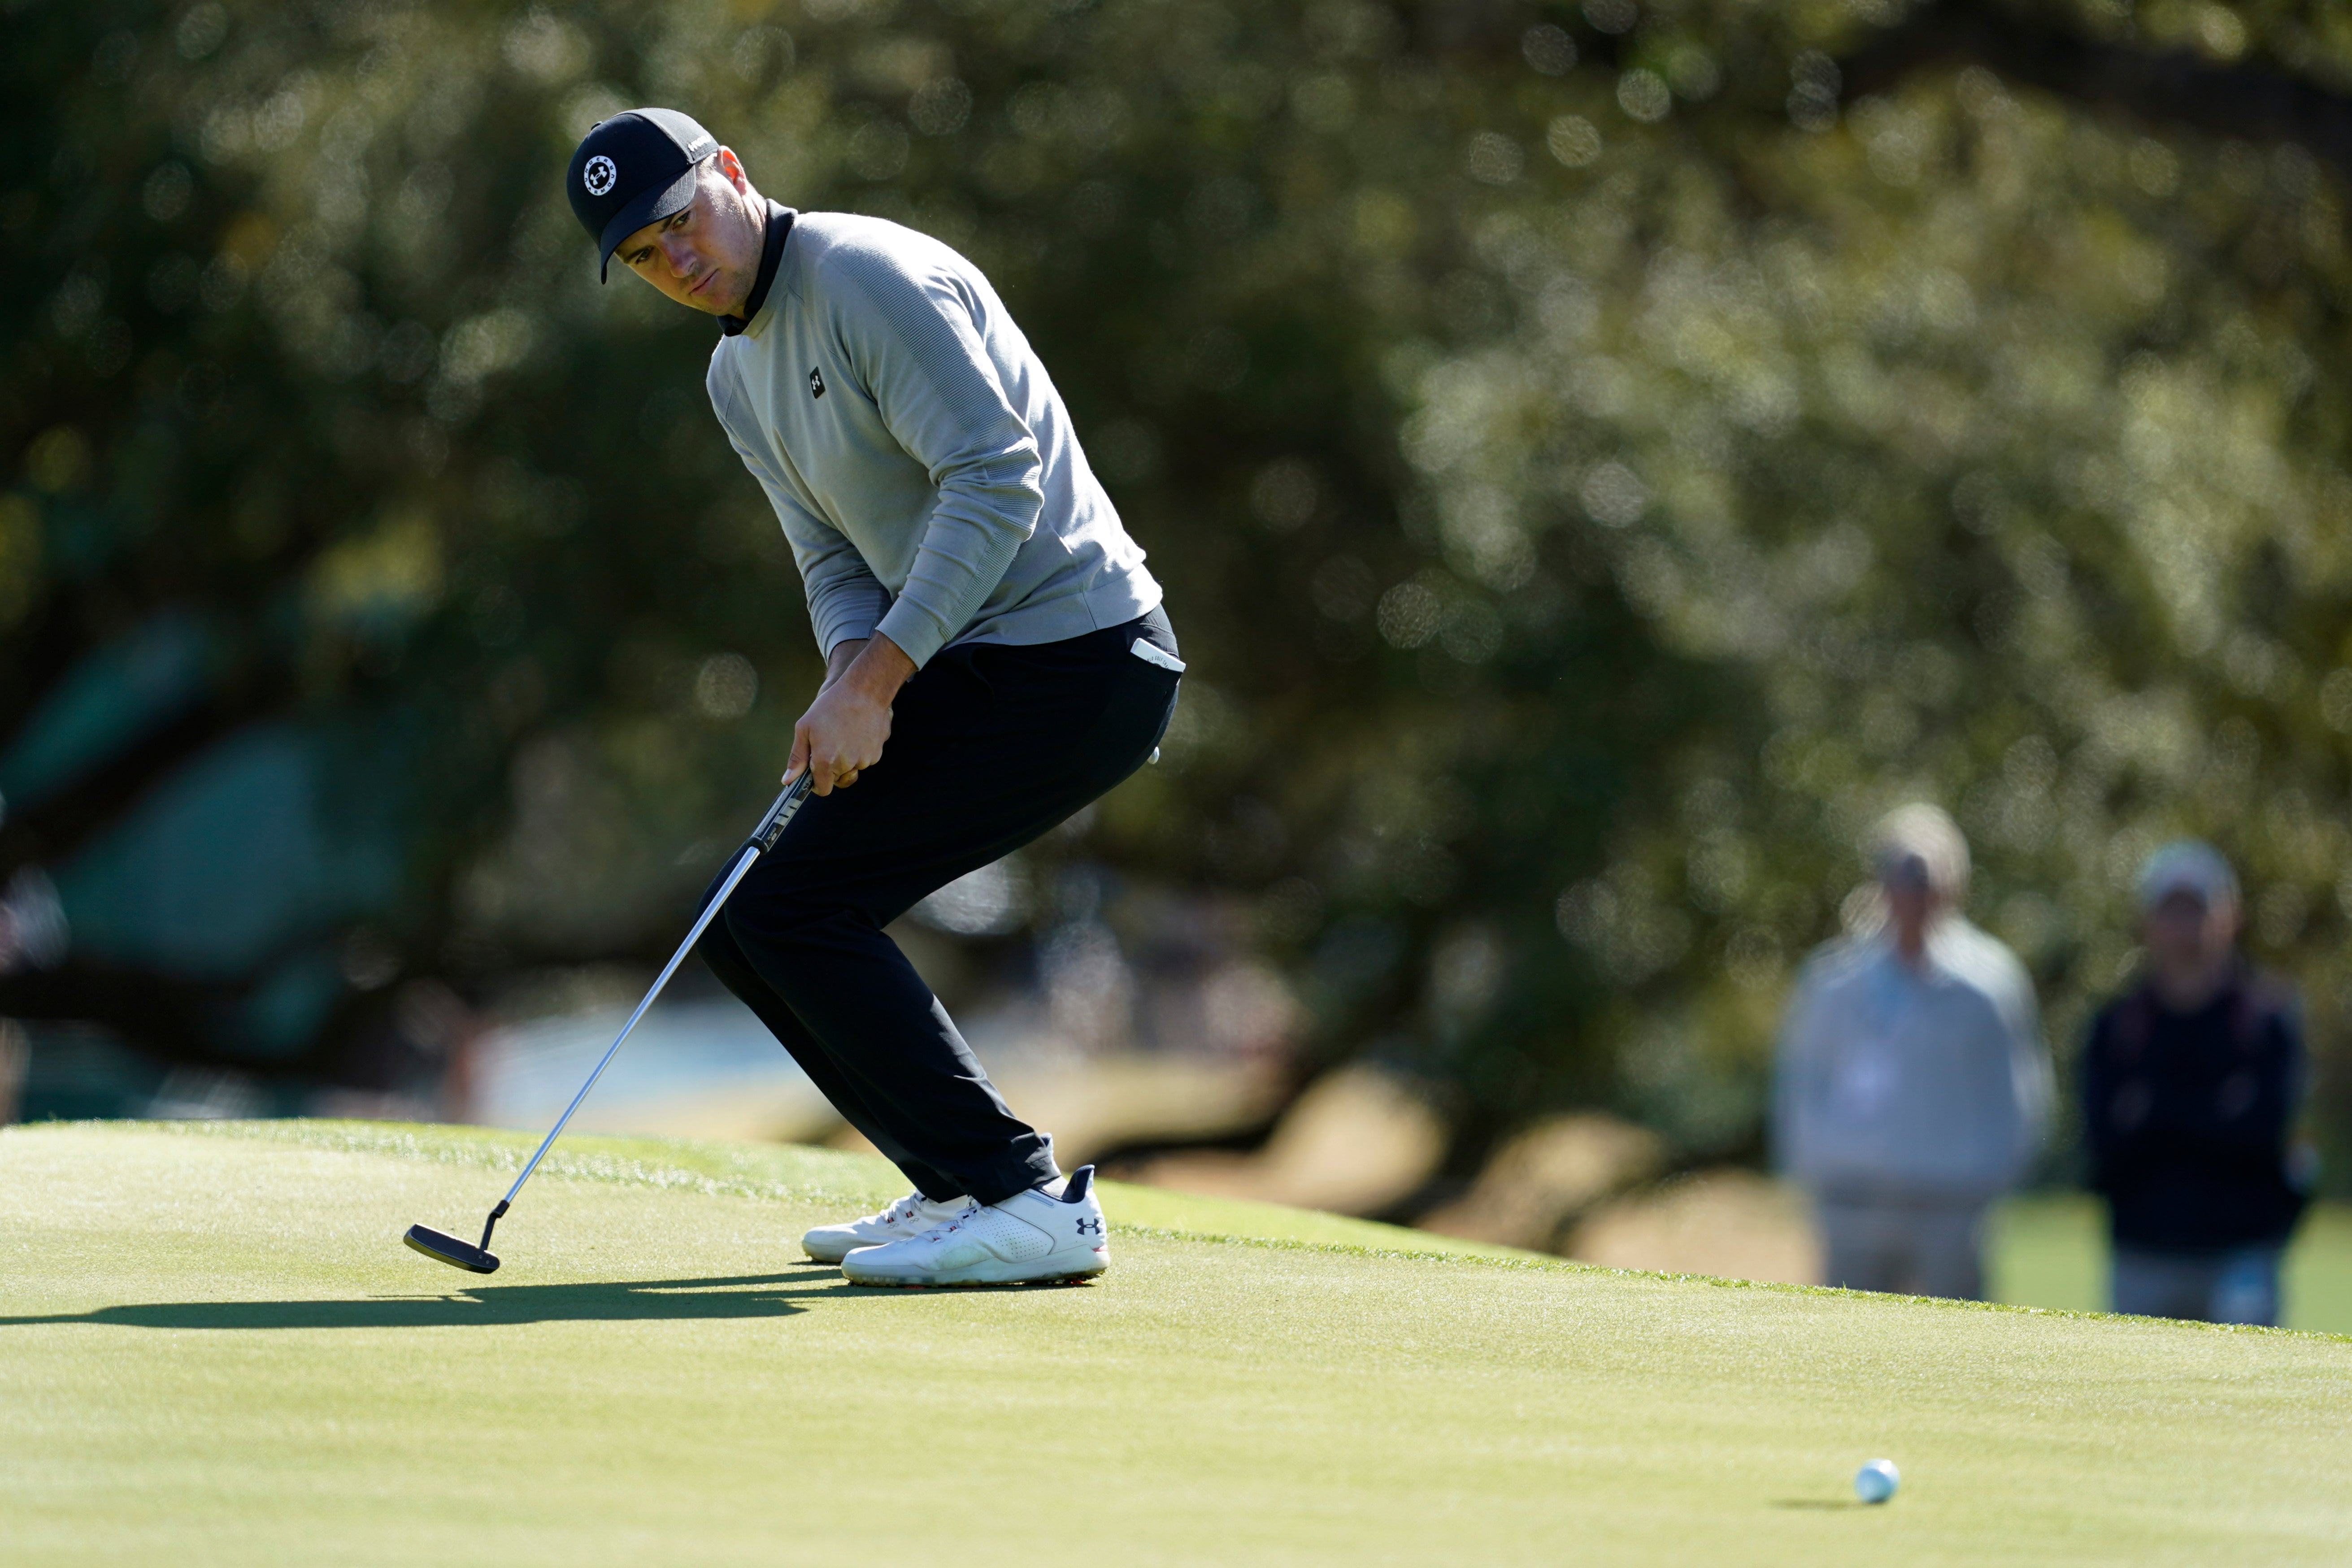 Jordan Spieth reacts to his putt on the sixth green in his match against Keegan Bradley in the WGC-Dell Technologies Match Play Championship (Tony Gutierrez/AP)